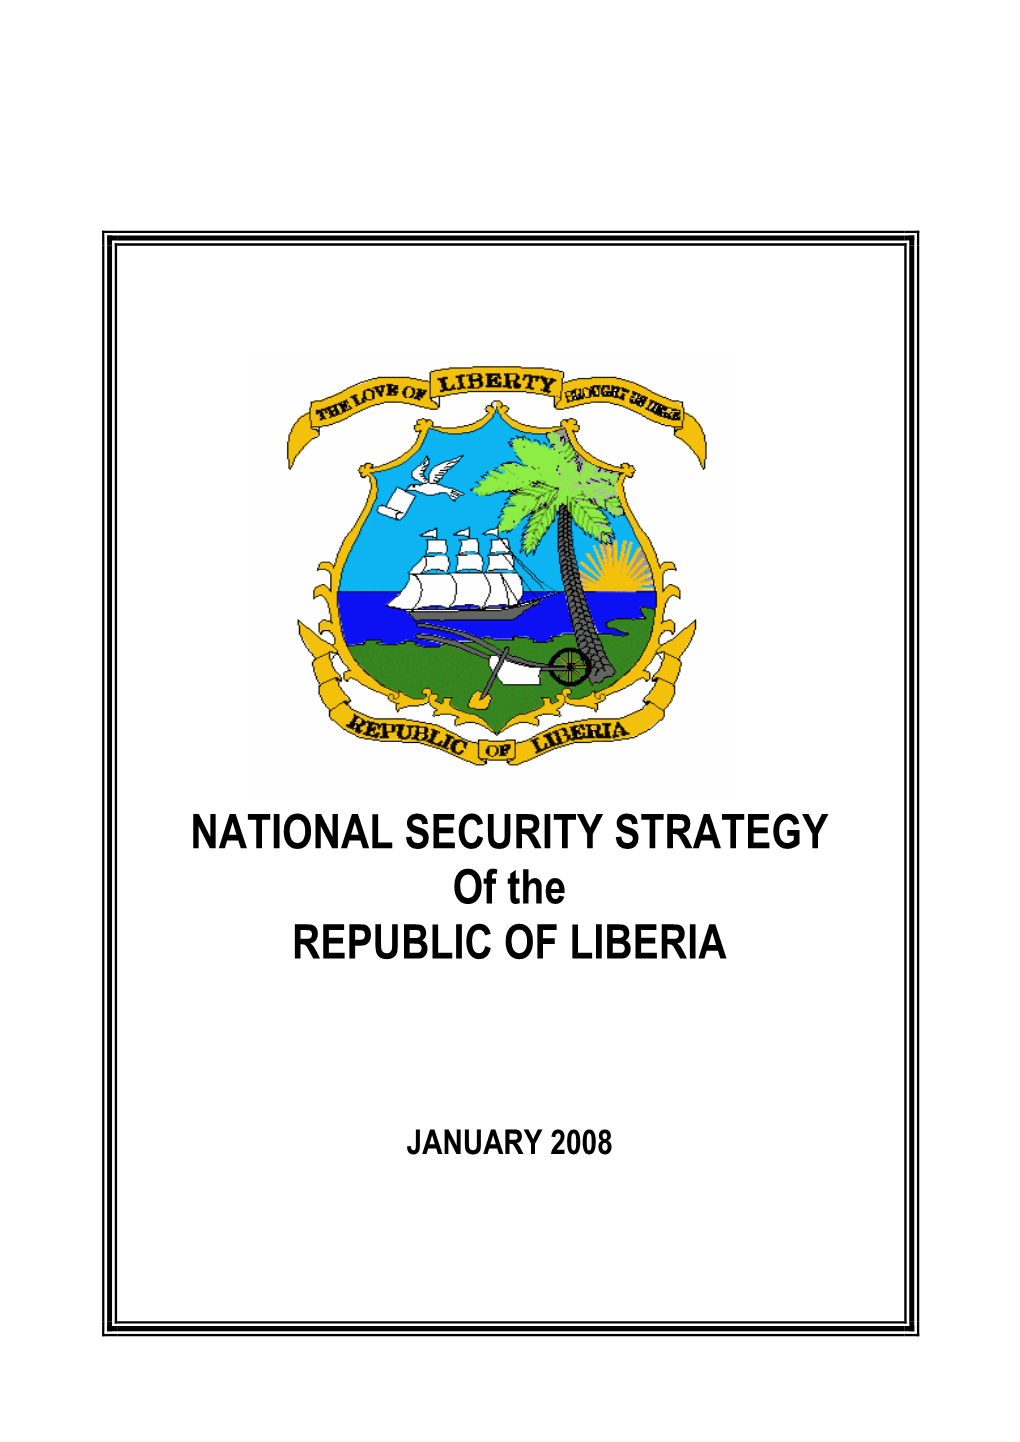 NATIONAL SECURITY STRATEGY of the REPUBLIC of LIBERIA